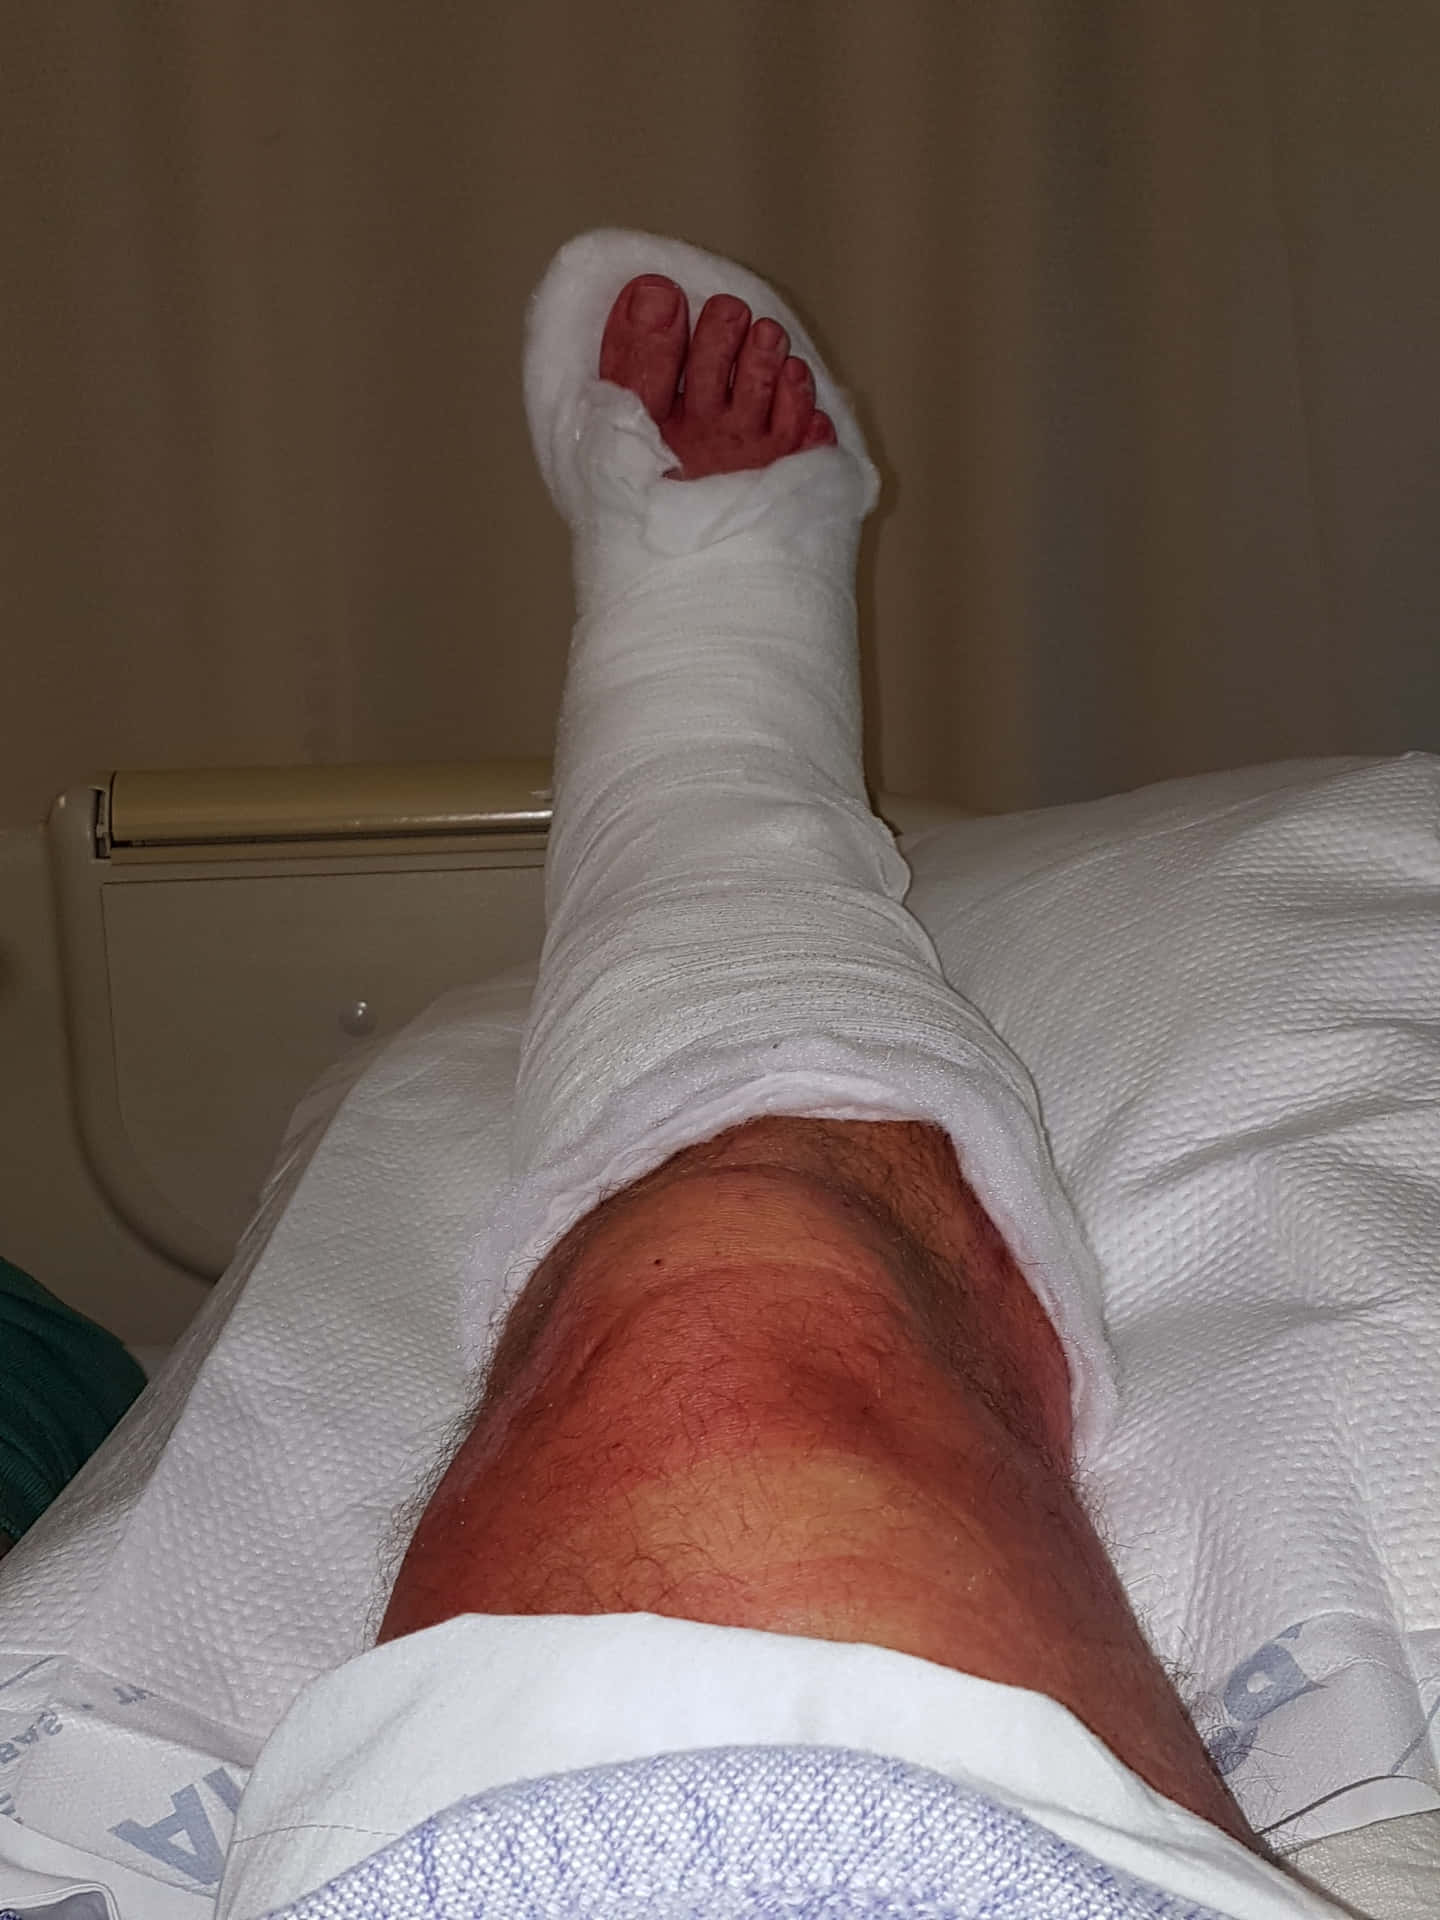 Injured Foot With Bandage Picture